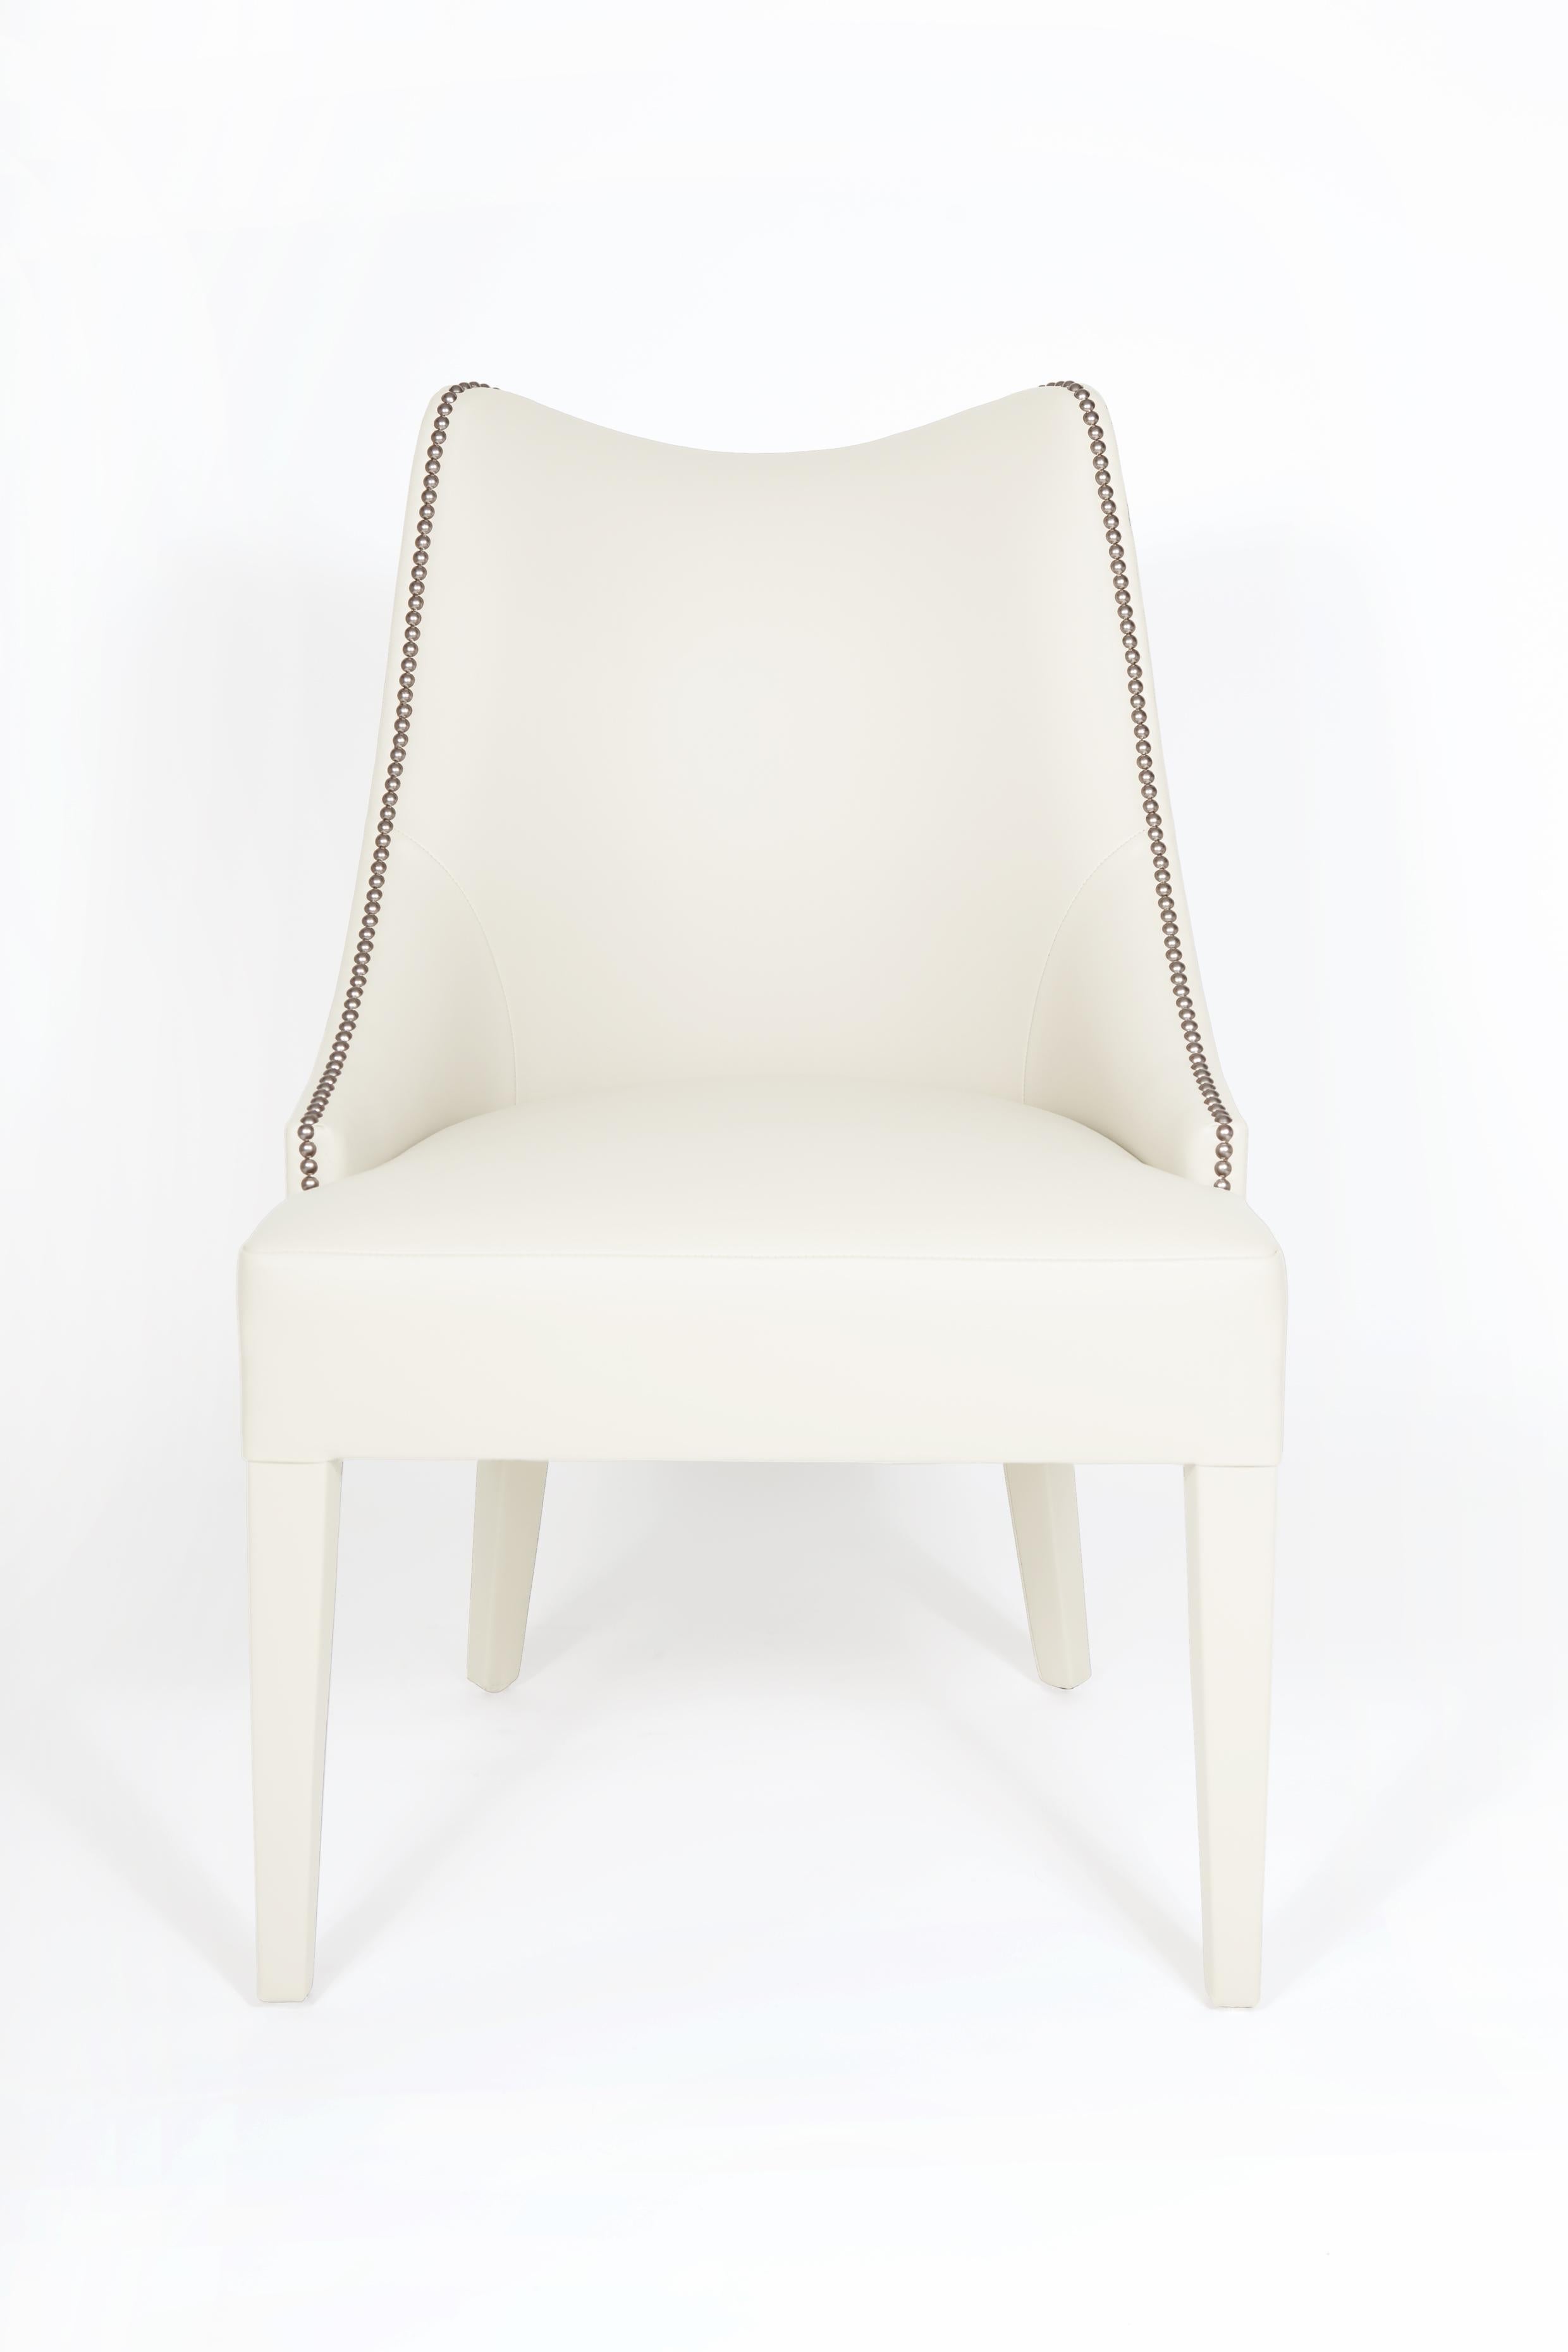 Portuguese Contemporary Velvet Dining Chair Offered With Nails On The Curve & Back For Sale